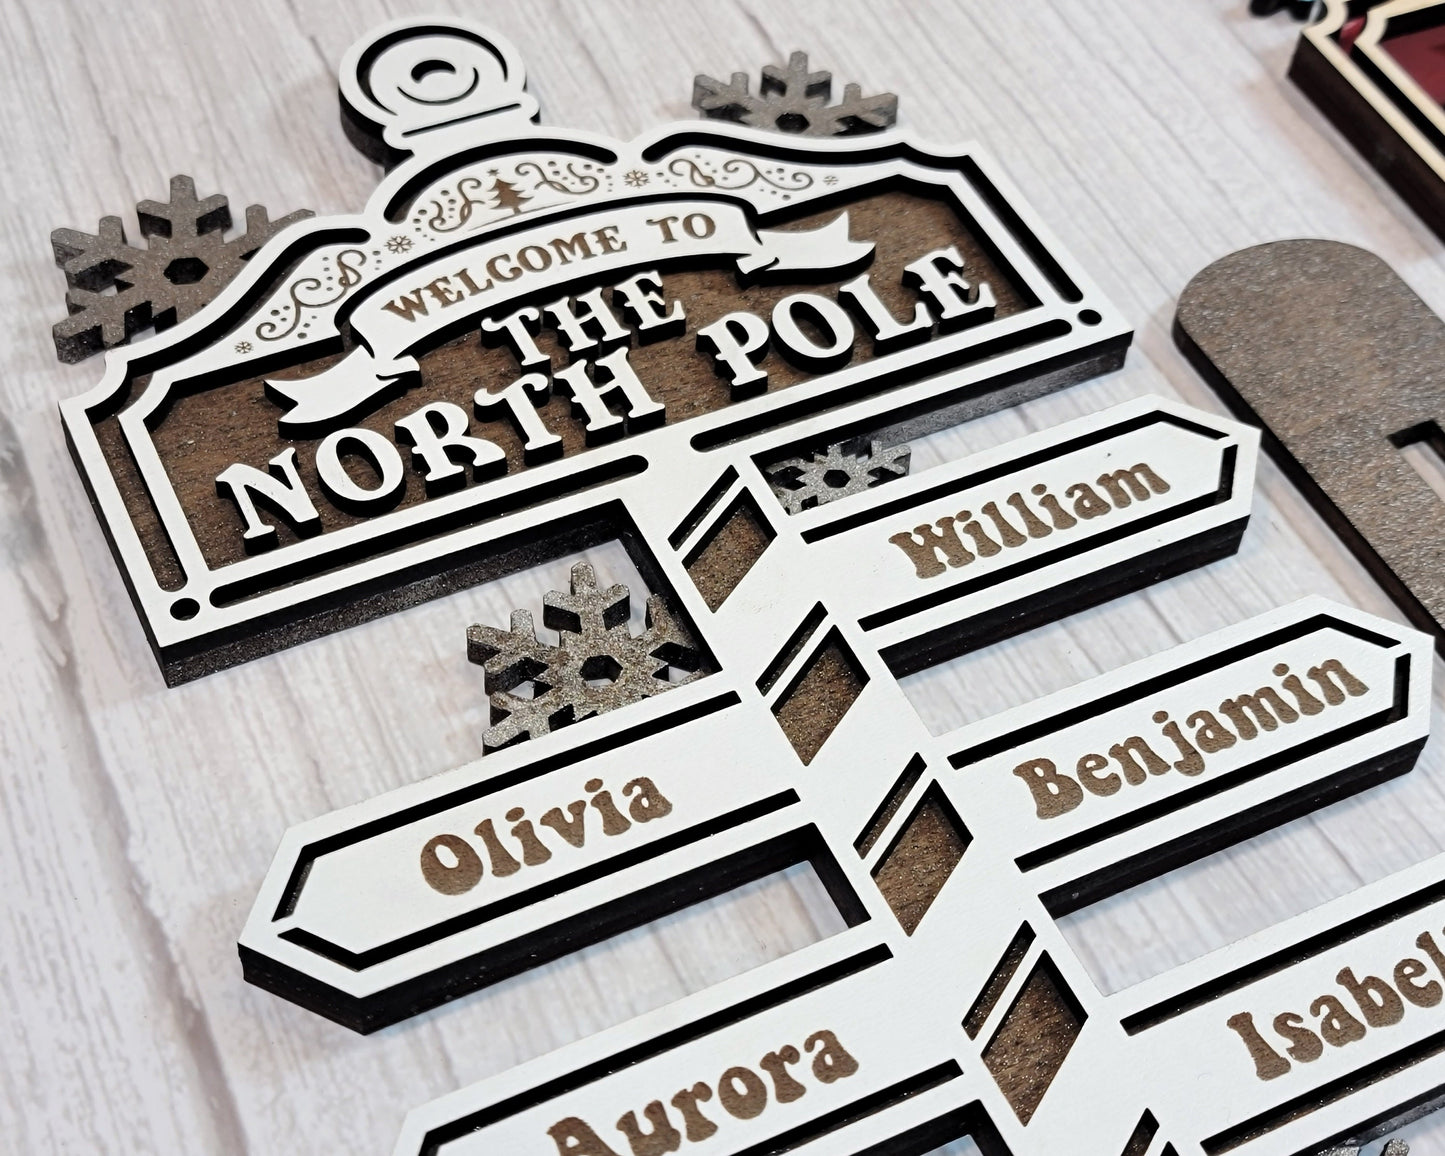 The North Pole Family Sign - Includes 2 to 8 Arrow Options - SVG File Download - Sized & Tested in Glowforge